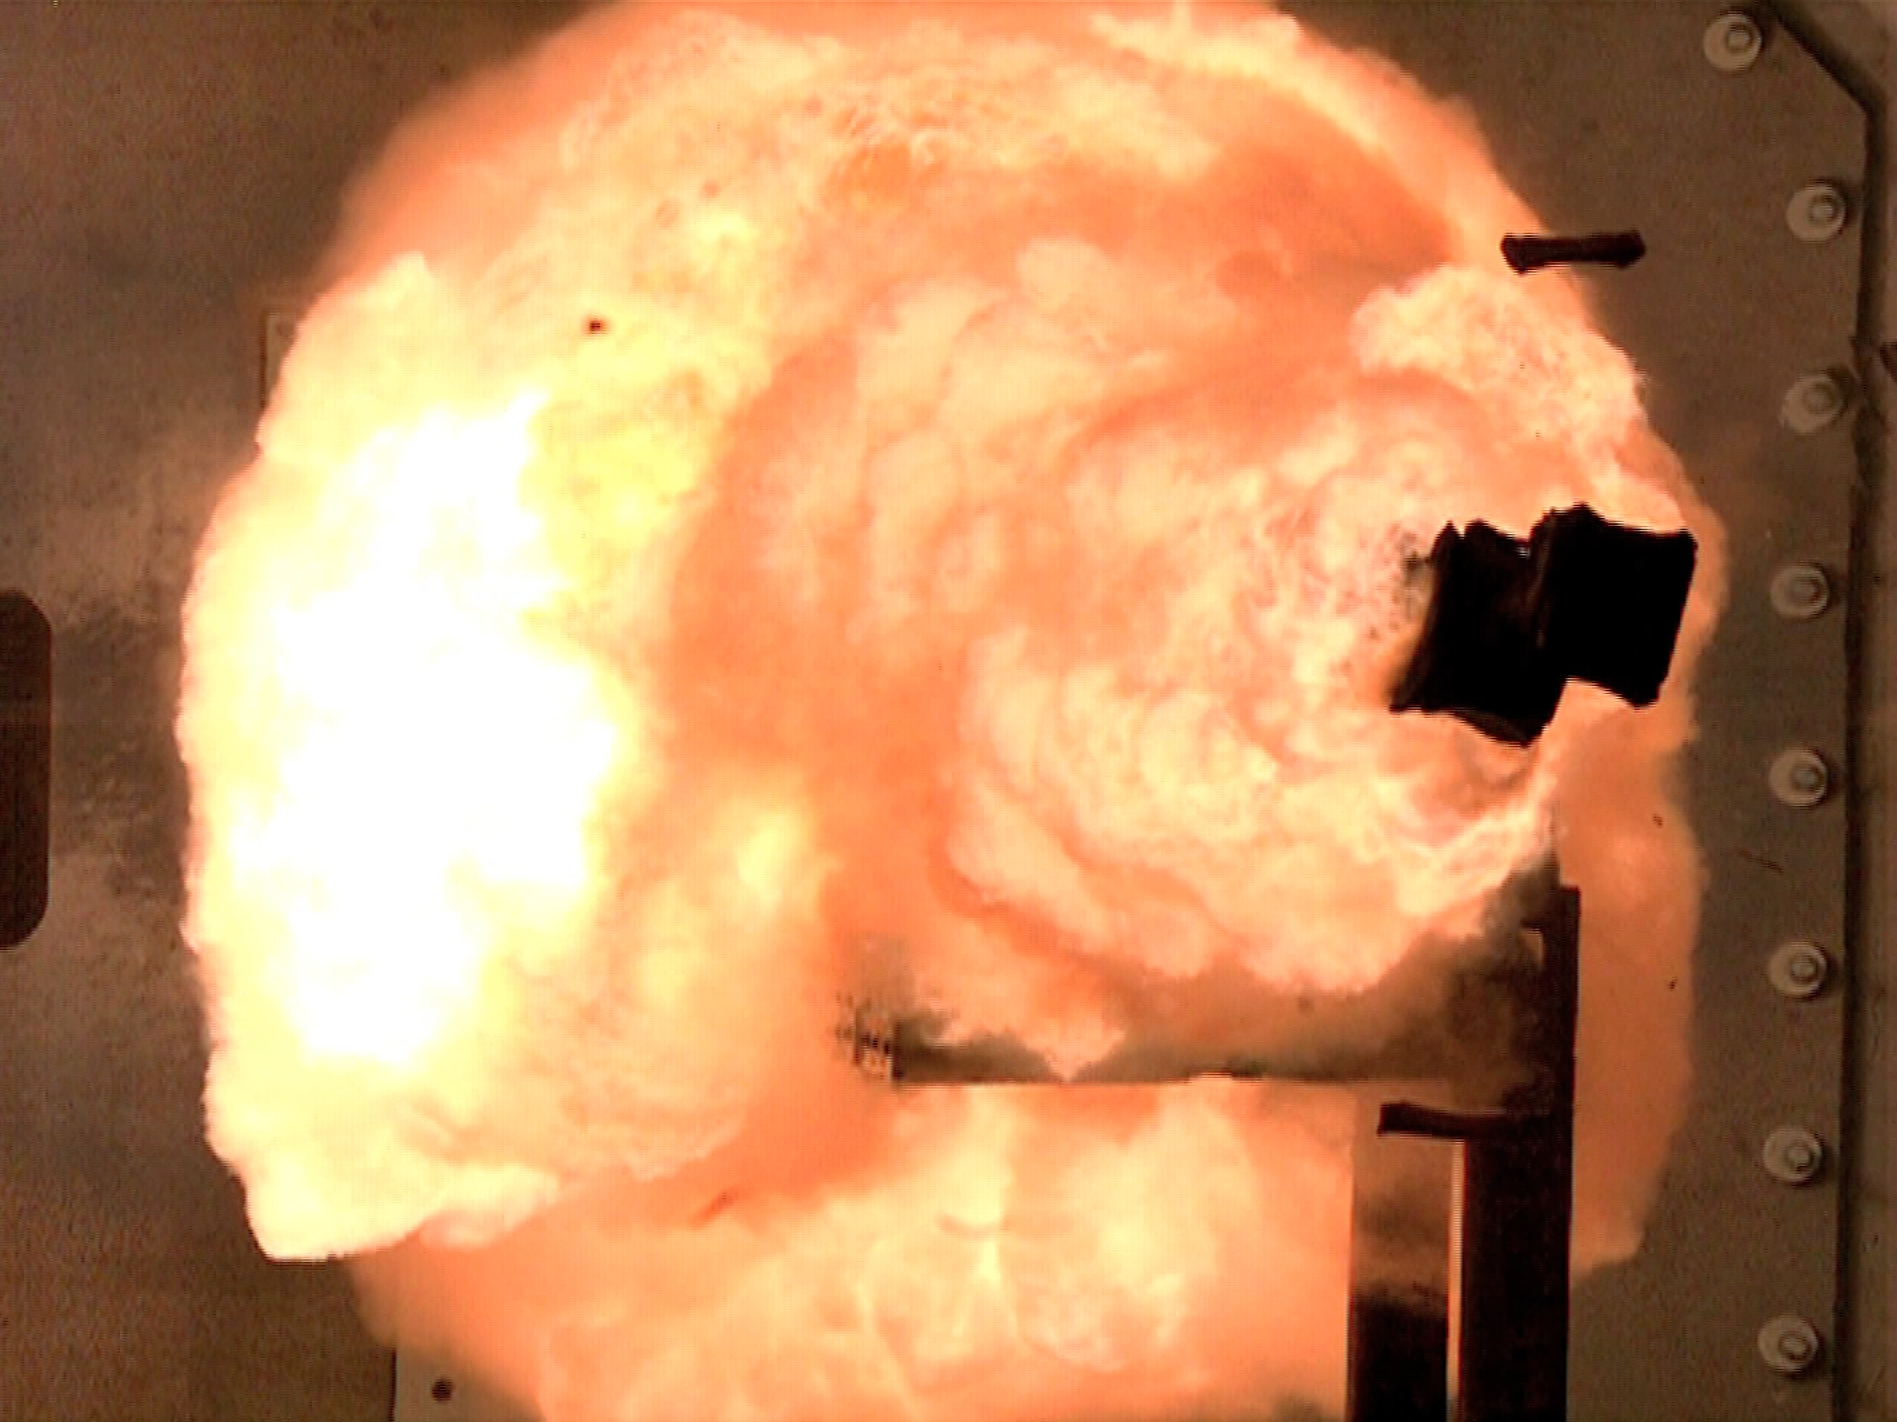  A high-speed camera captures the first full-energy shots from the Office of Naval Research-funded electromagnetic railgun prototype launcher in 2012. US Navy Photo